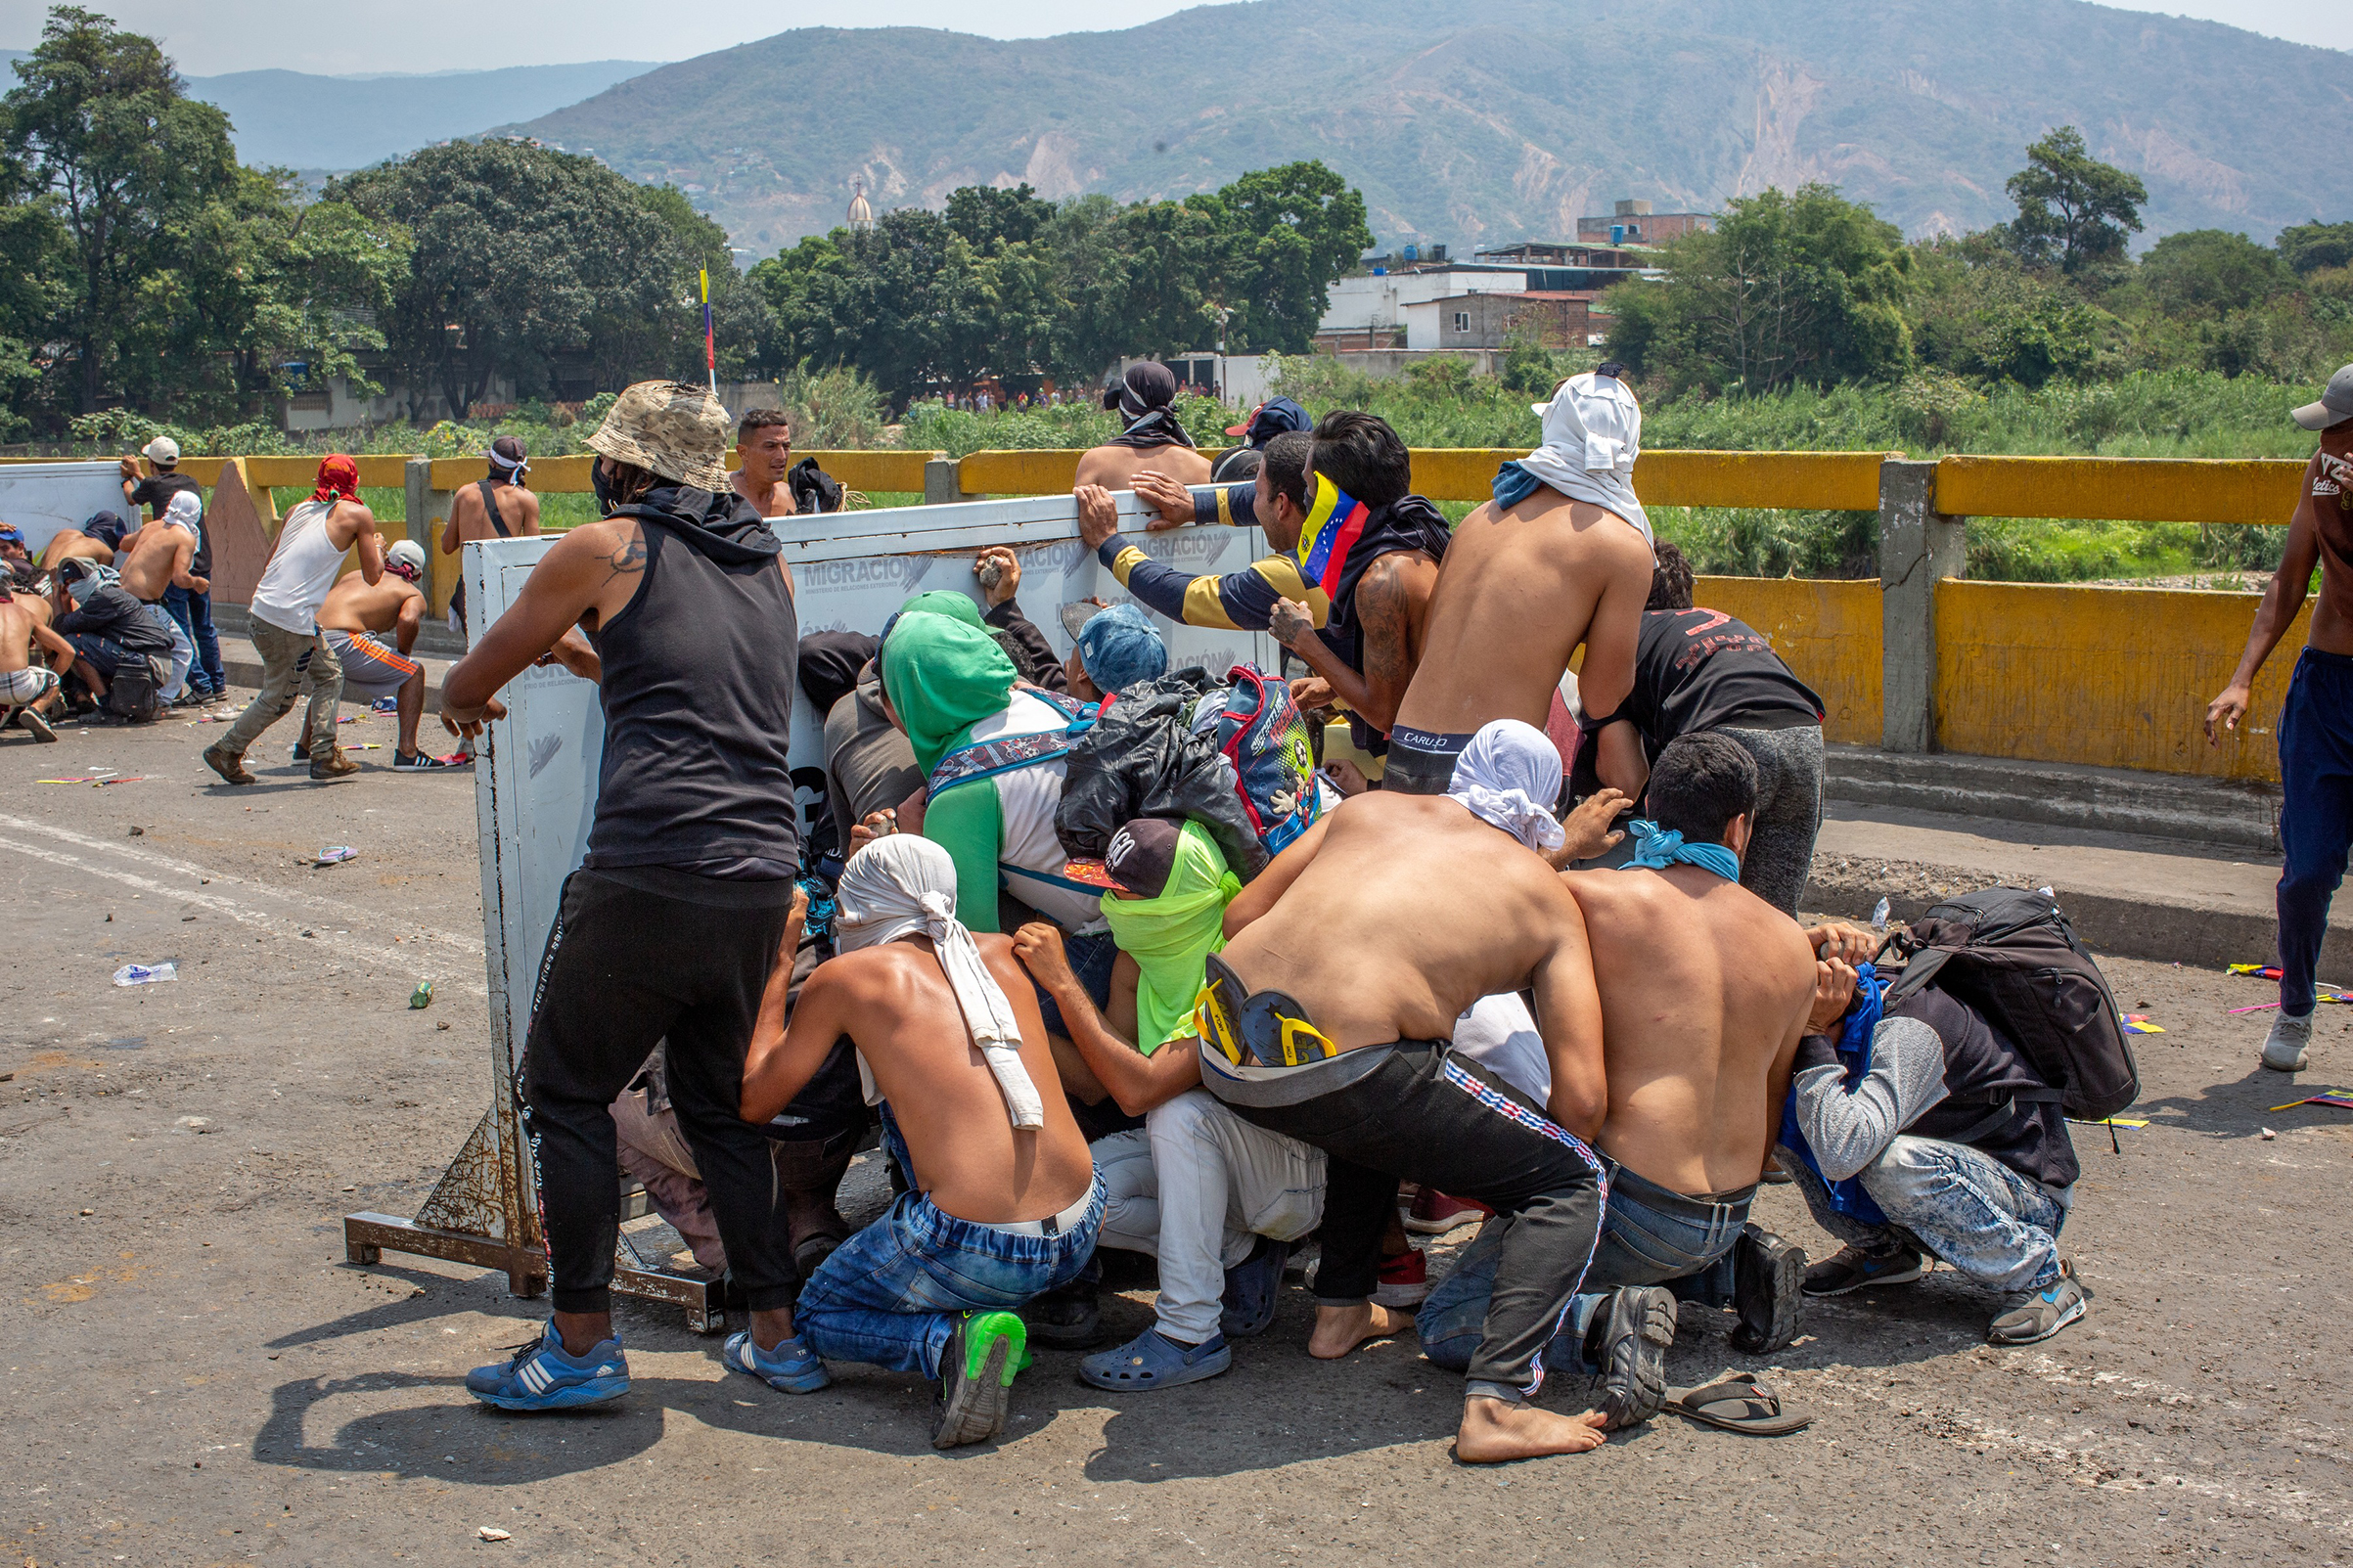 A group of demonstrators take cover during a clash with Venezuelan national police officers on the Simón Bolívar International Bridge in Cúcuta, Colombia, on Feb. 23. Clashes along the border stranded aid caravans. March 11 issue. (Natalie Keyssar for TIME)